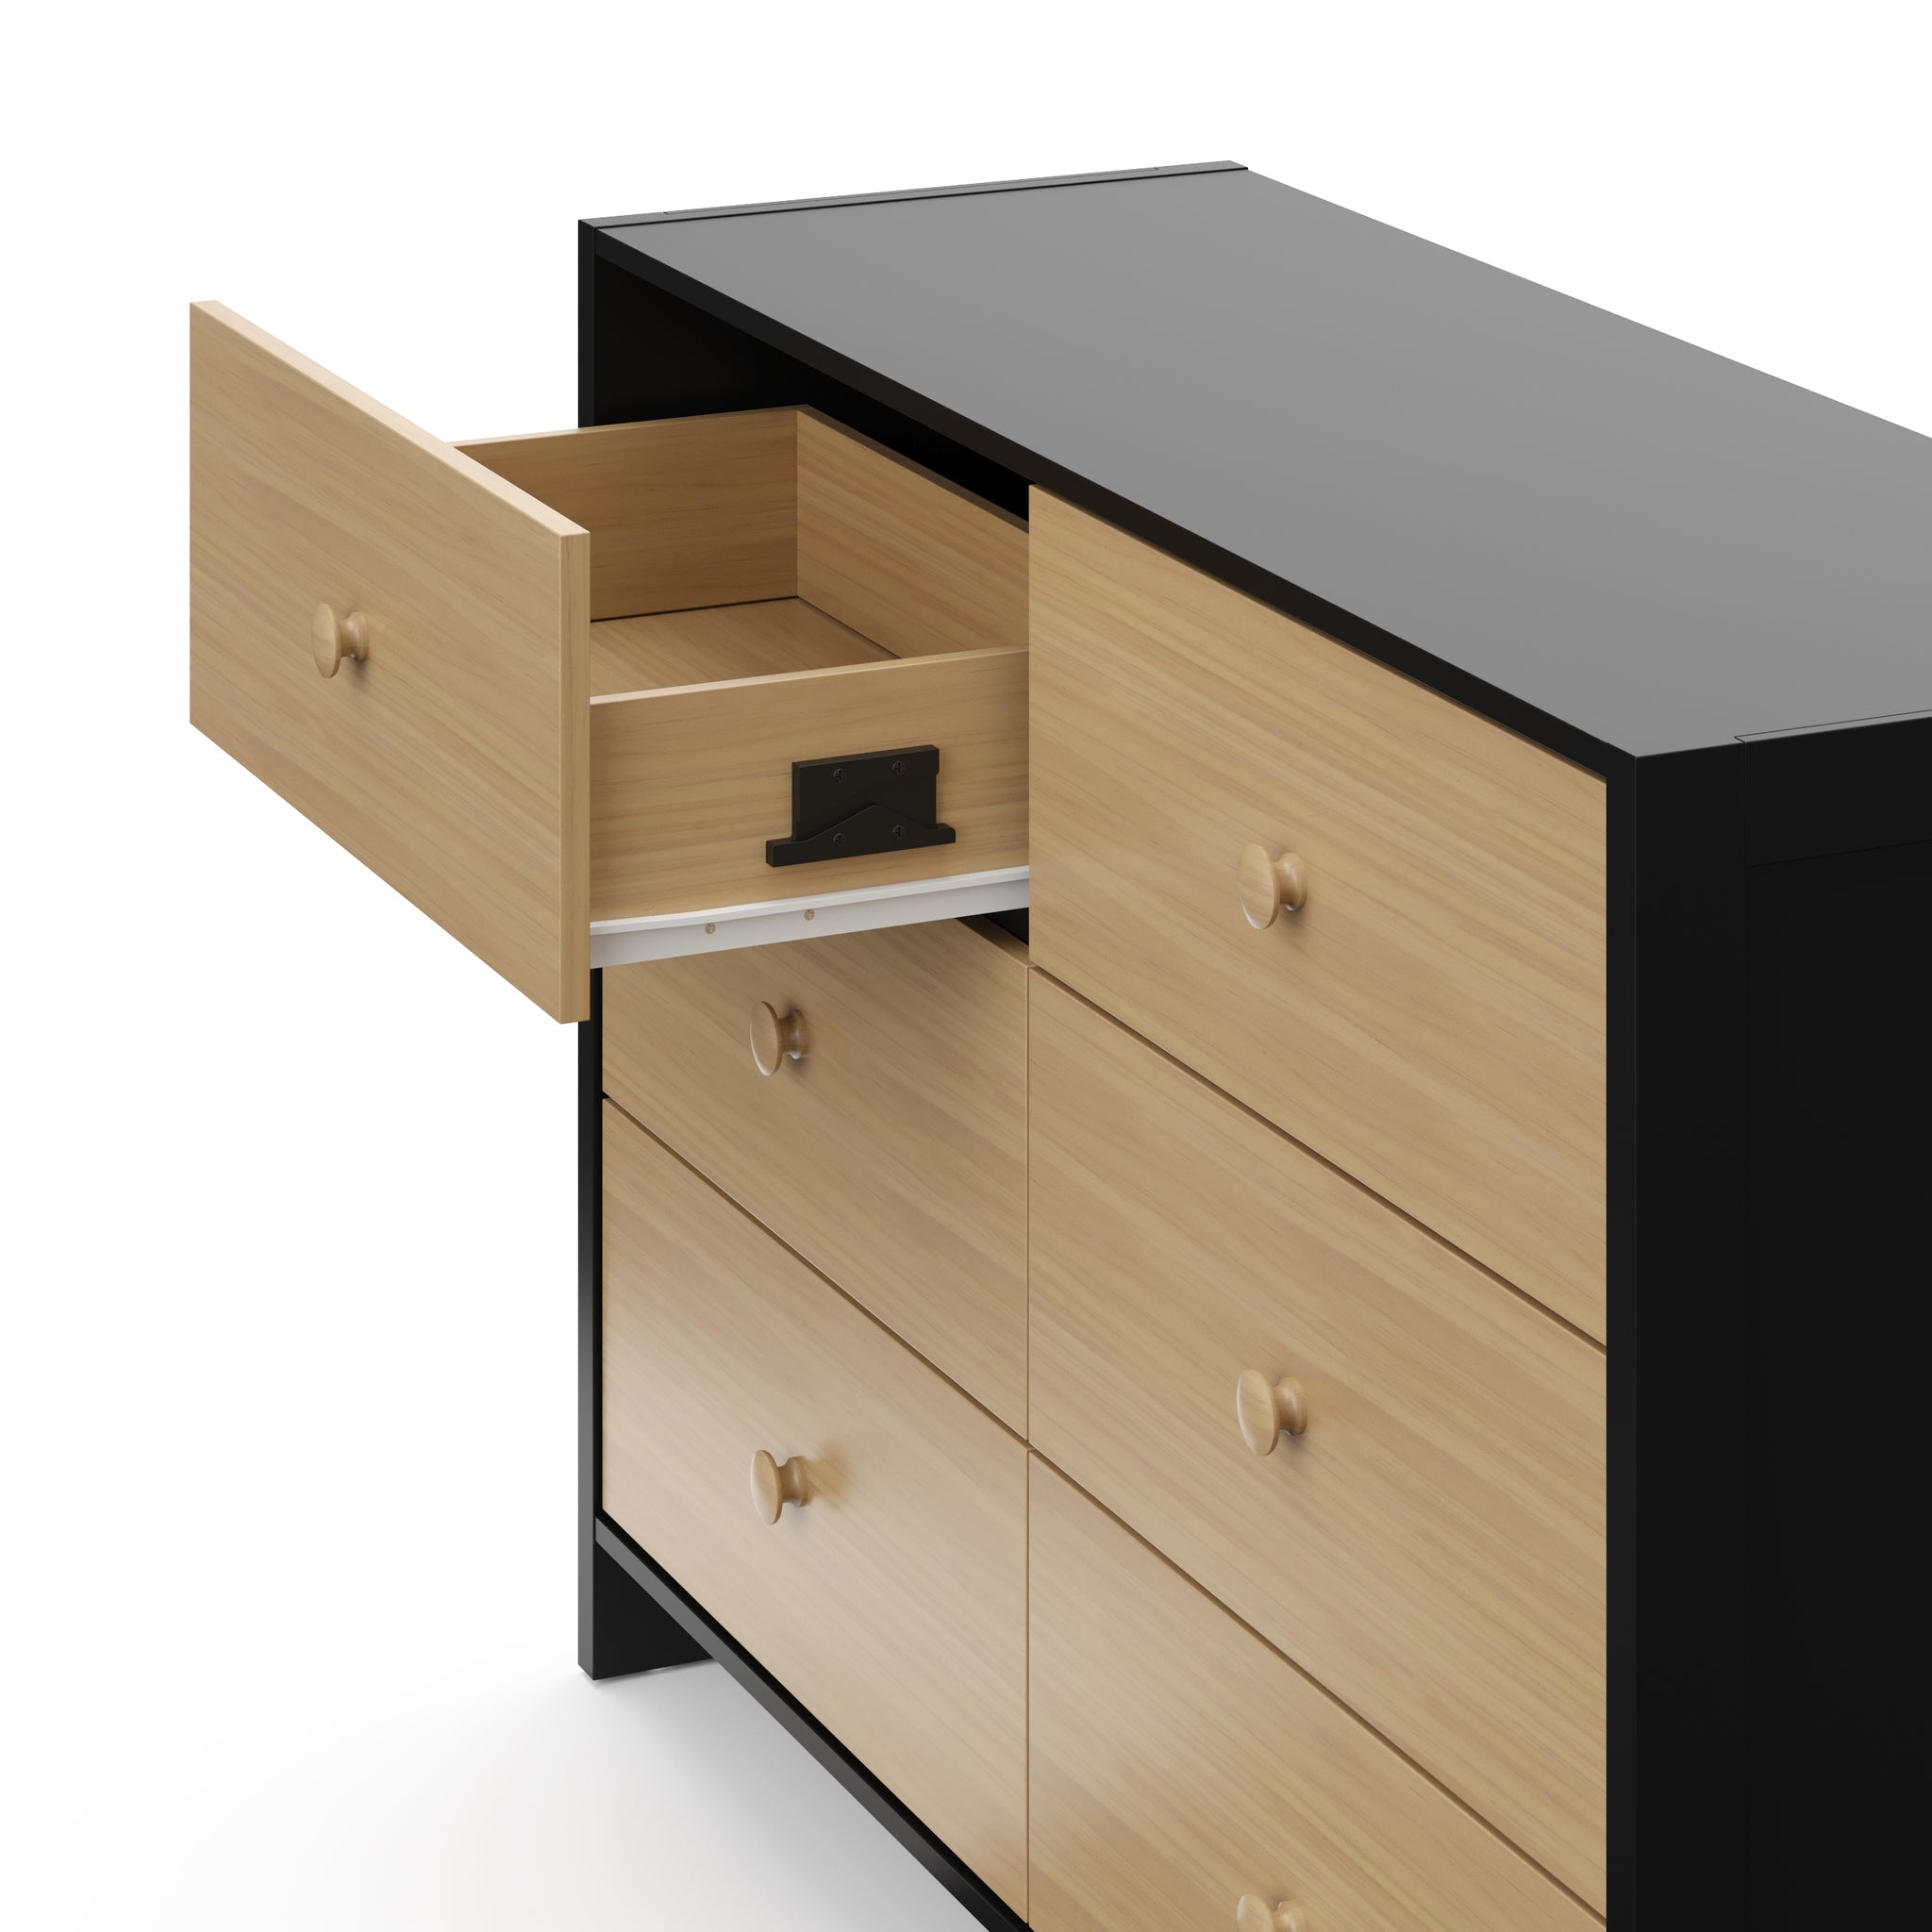 Top-angled view of a black with driftwood dresser with one open drawer, showcasing an interlocking drawer system.